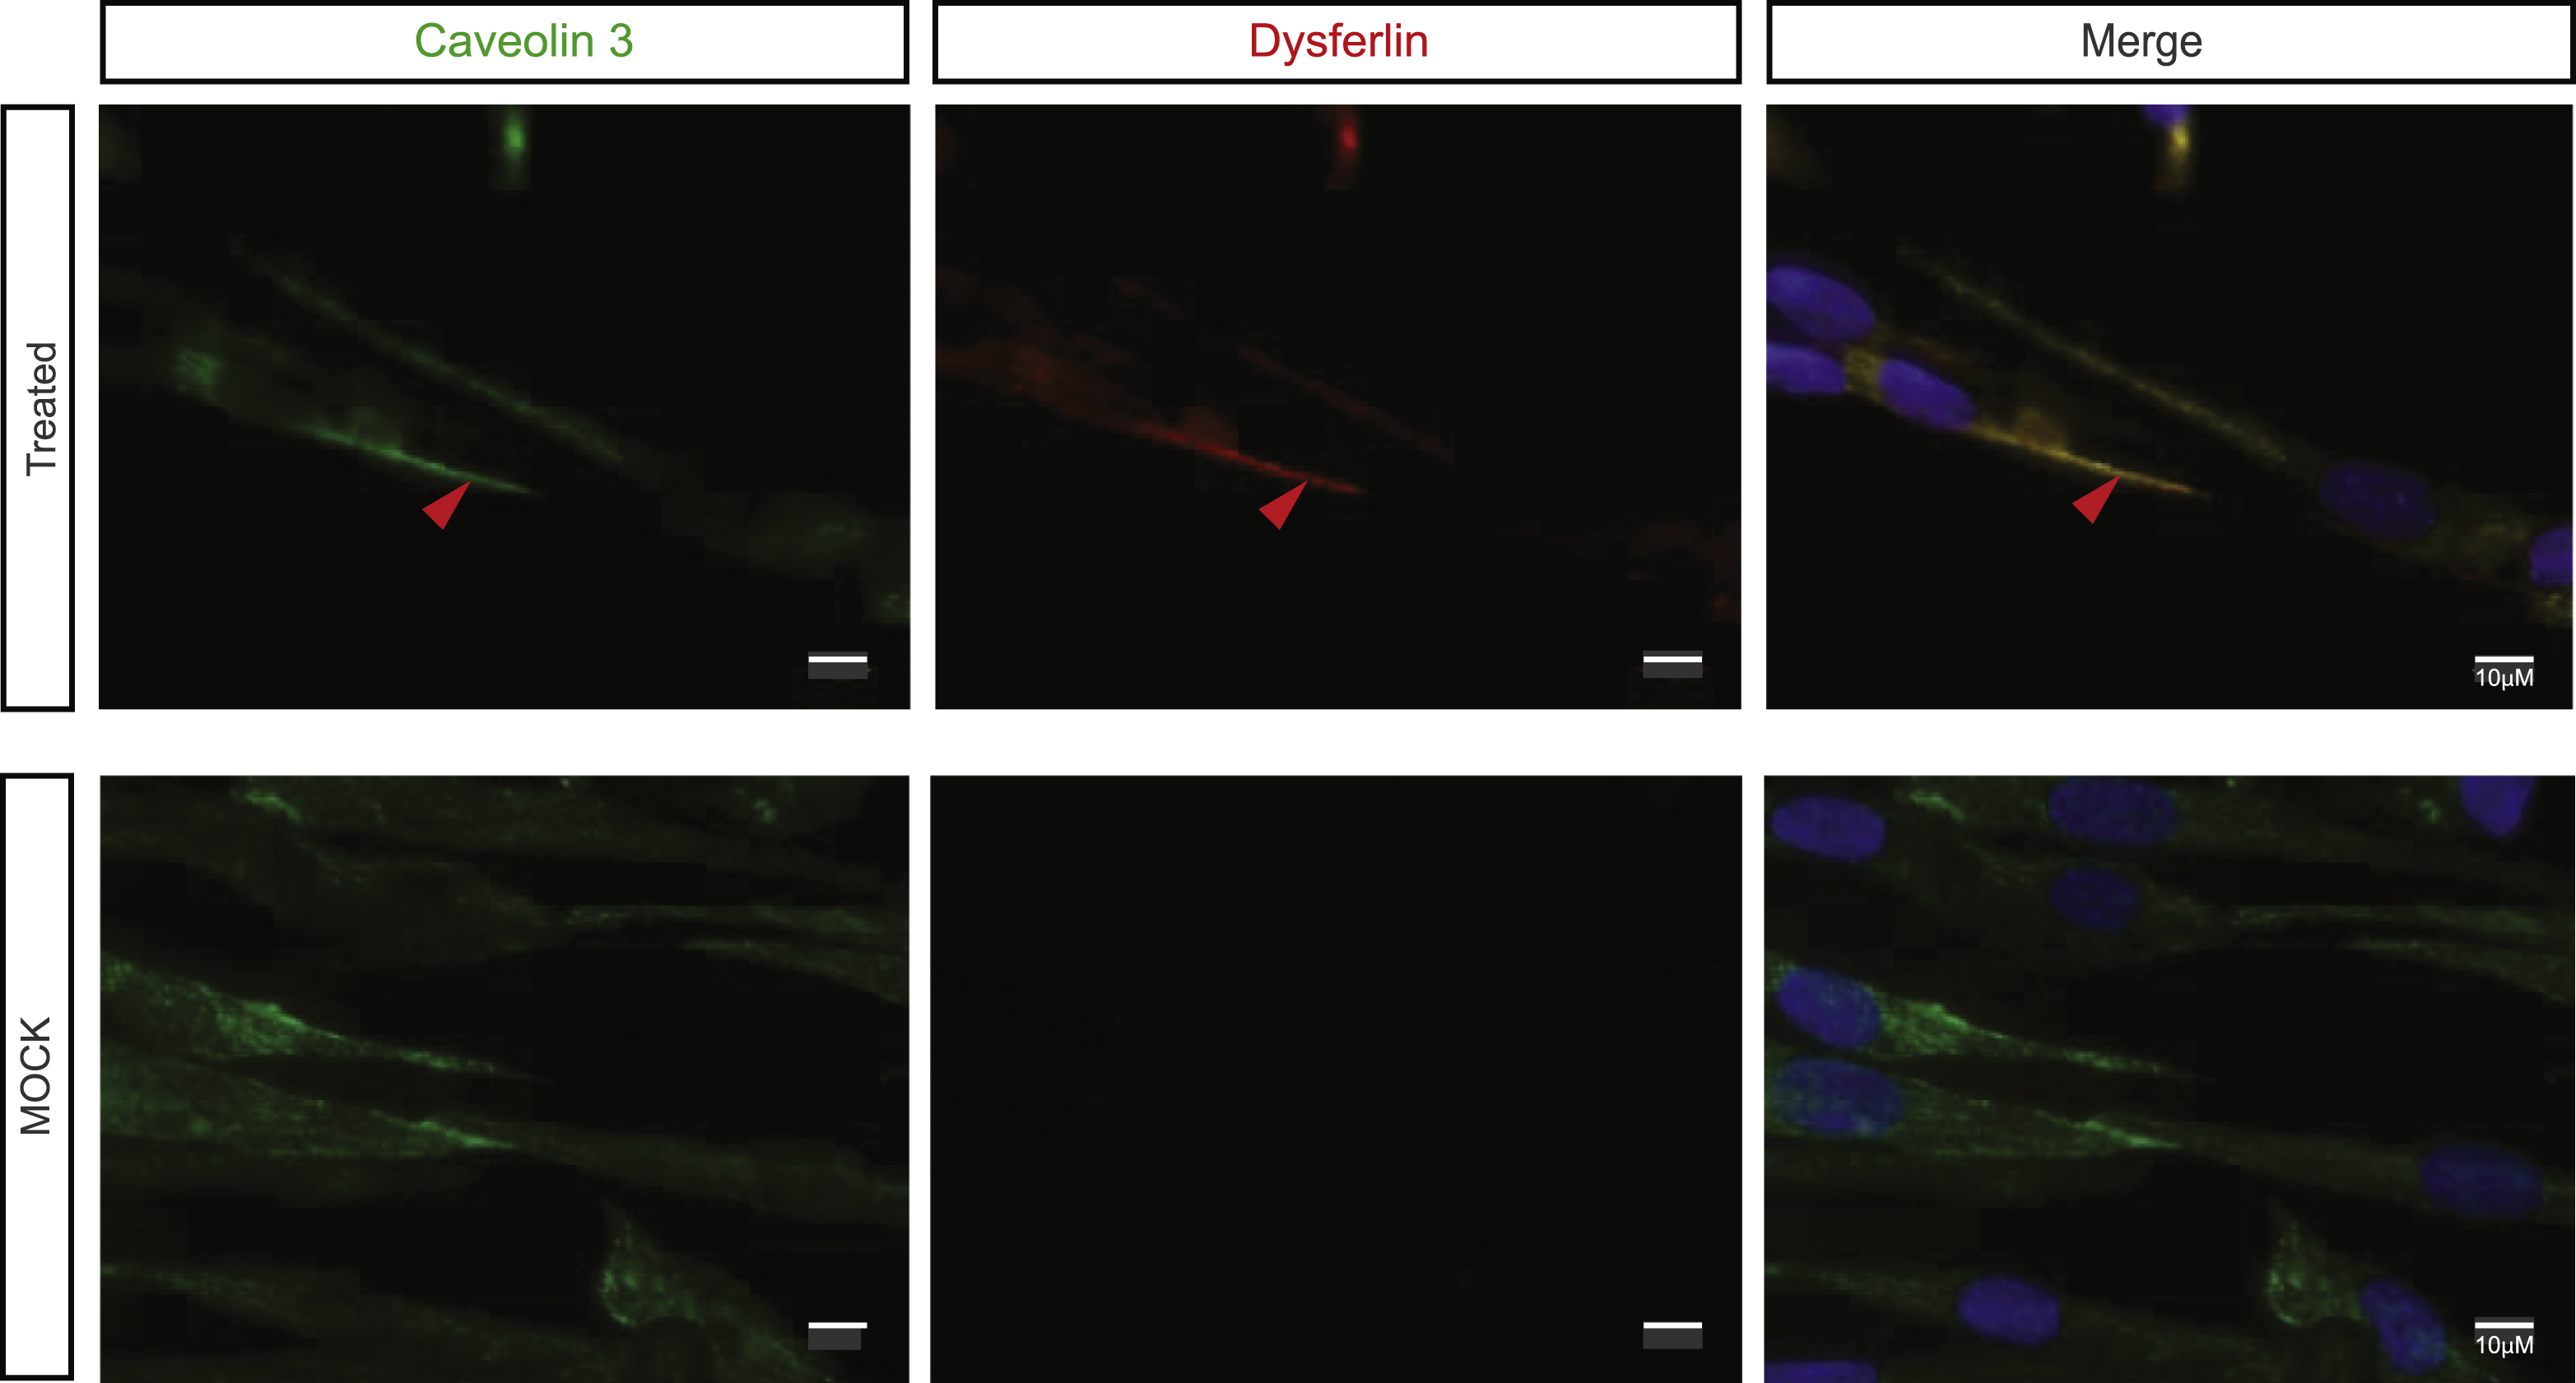 Exon 32-skipped dysferlin is correctly localized. Caveolin 3 labeling: maturation of myotubes and production of dysferlin were evidenced by Hamlet 1 labeling (Bars = 10 μm, arrow pointed to colocalized signal). DAPI was used as a nucleus marker. All images were captured by an apotome microscope.